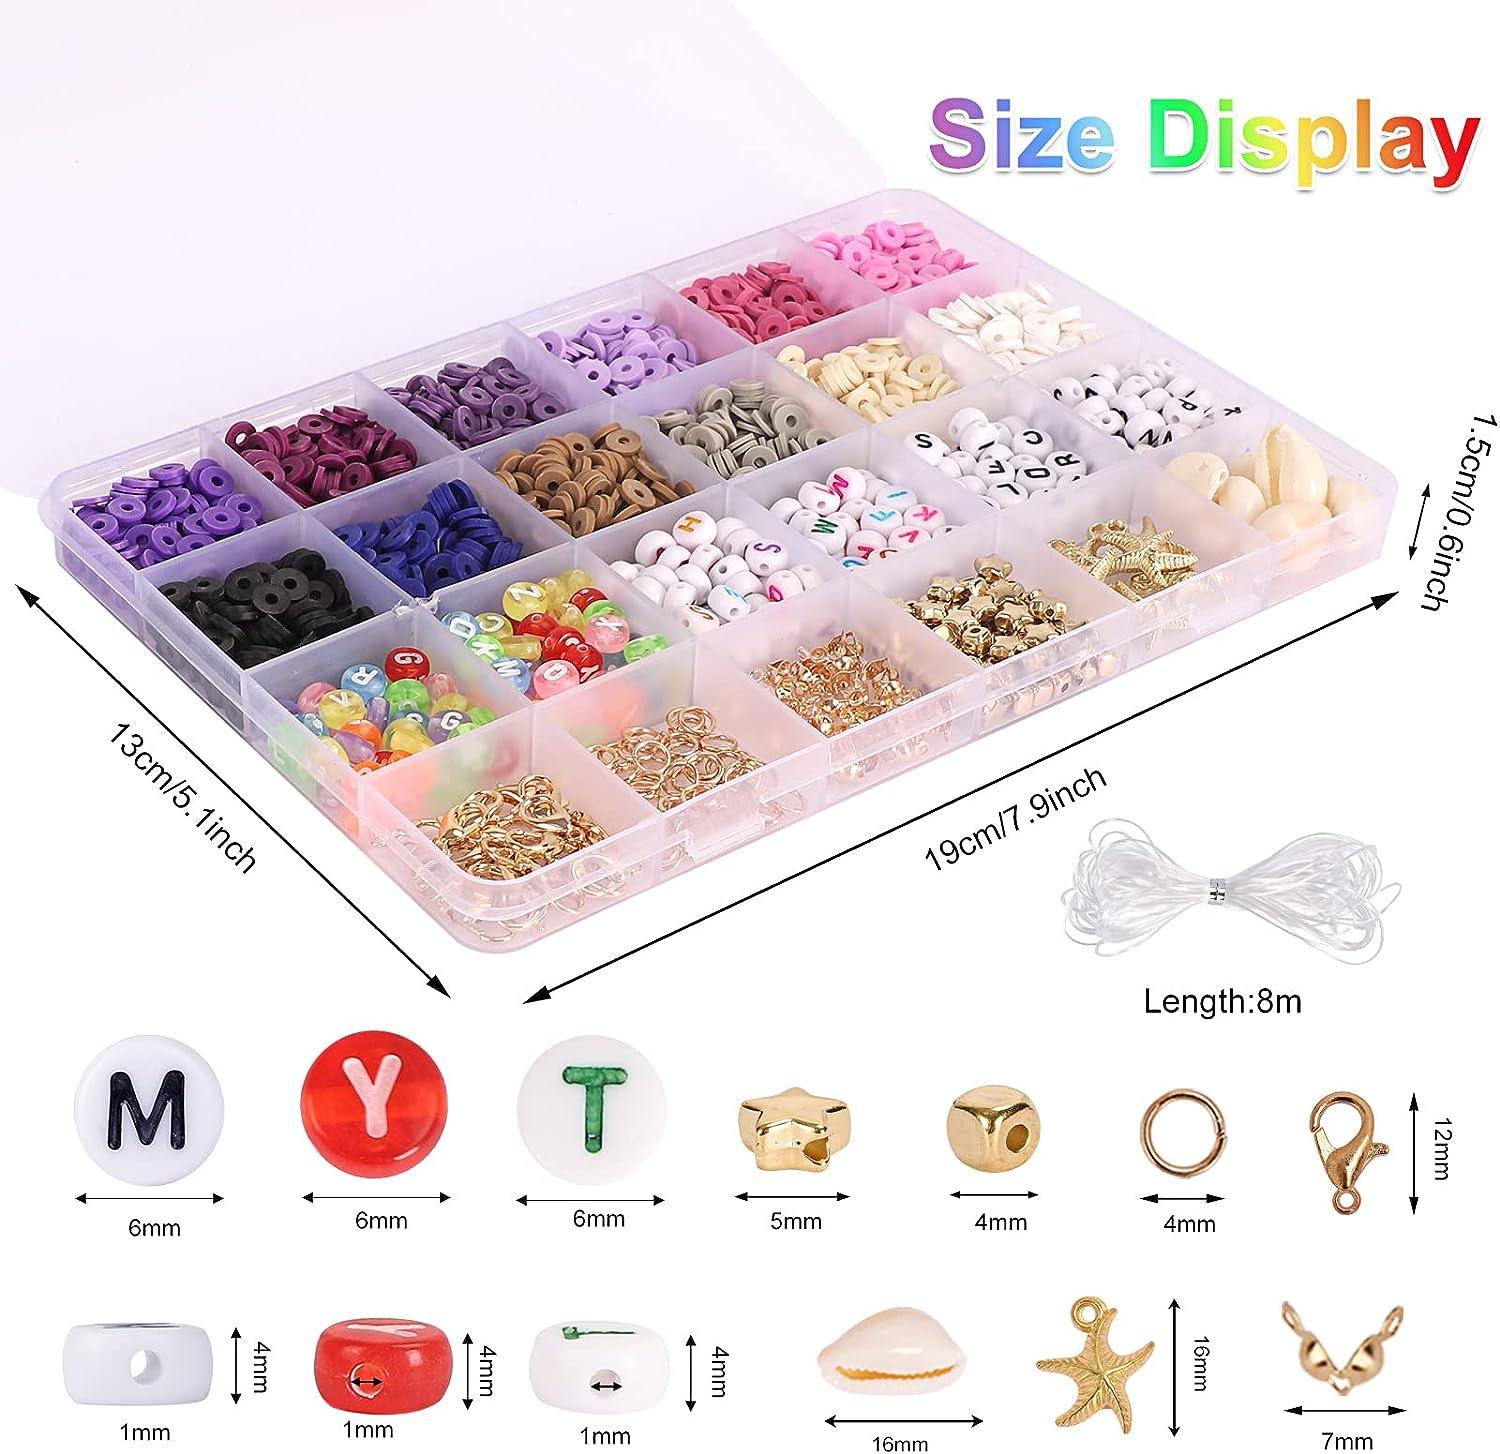 QUEFE 14420pcs Beads for Bracelet Making Kit, 56 Colors Spacer Heishi Beads  Flat Round Polymer Clay Beads with Pendant Charms Kits and Elastic Strings